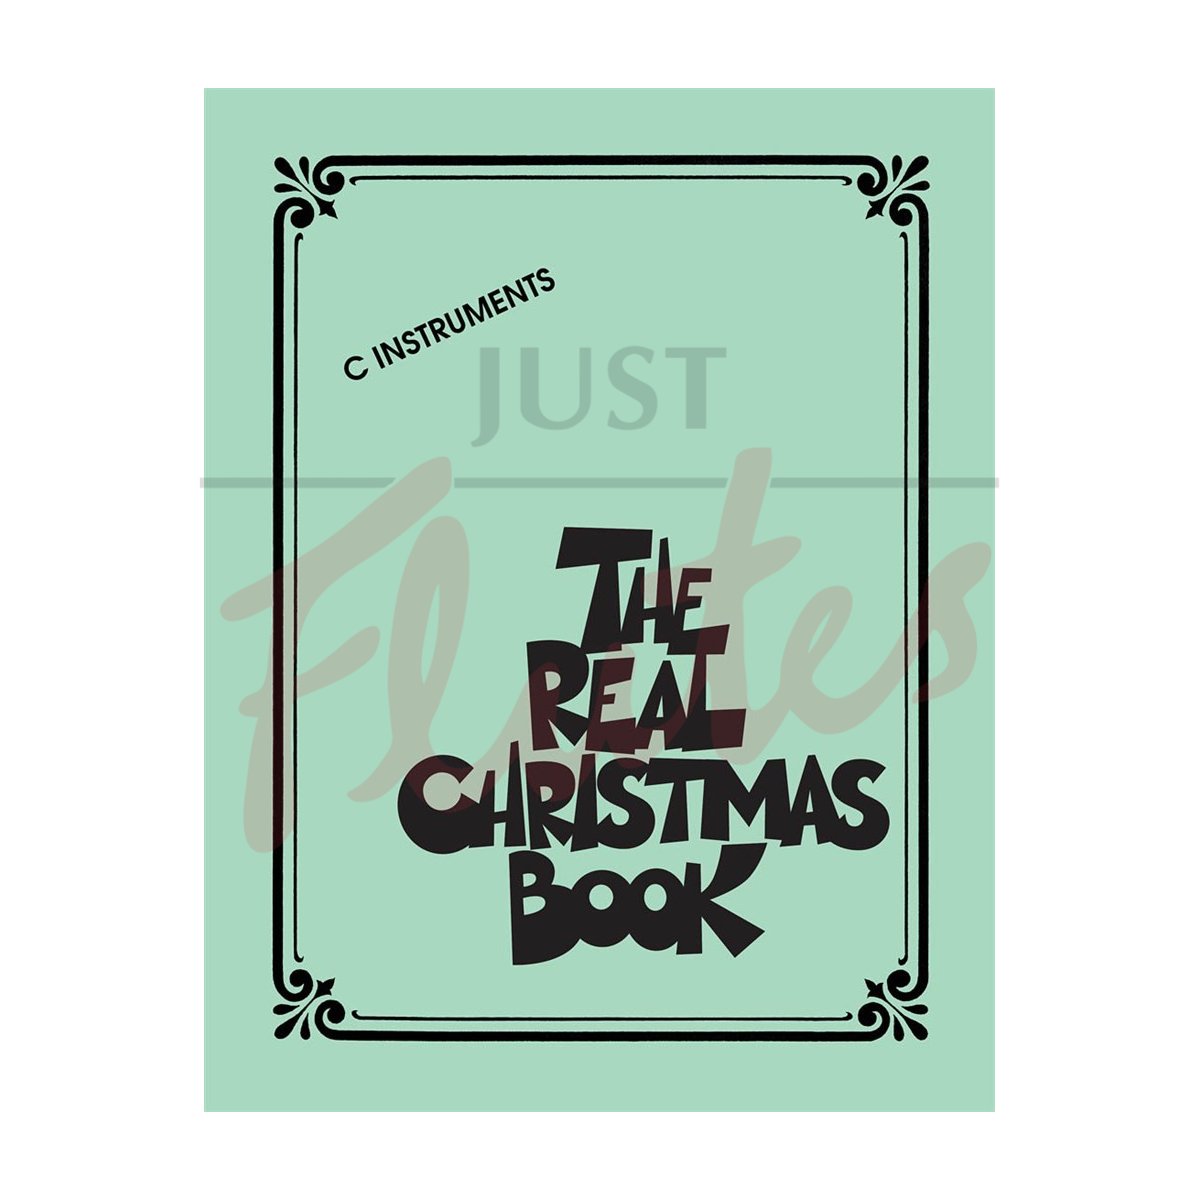 The Real Christmas Book (2nd Edition) for C Instruments